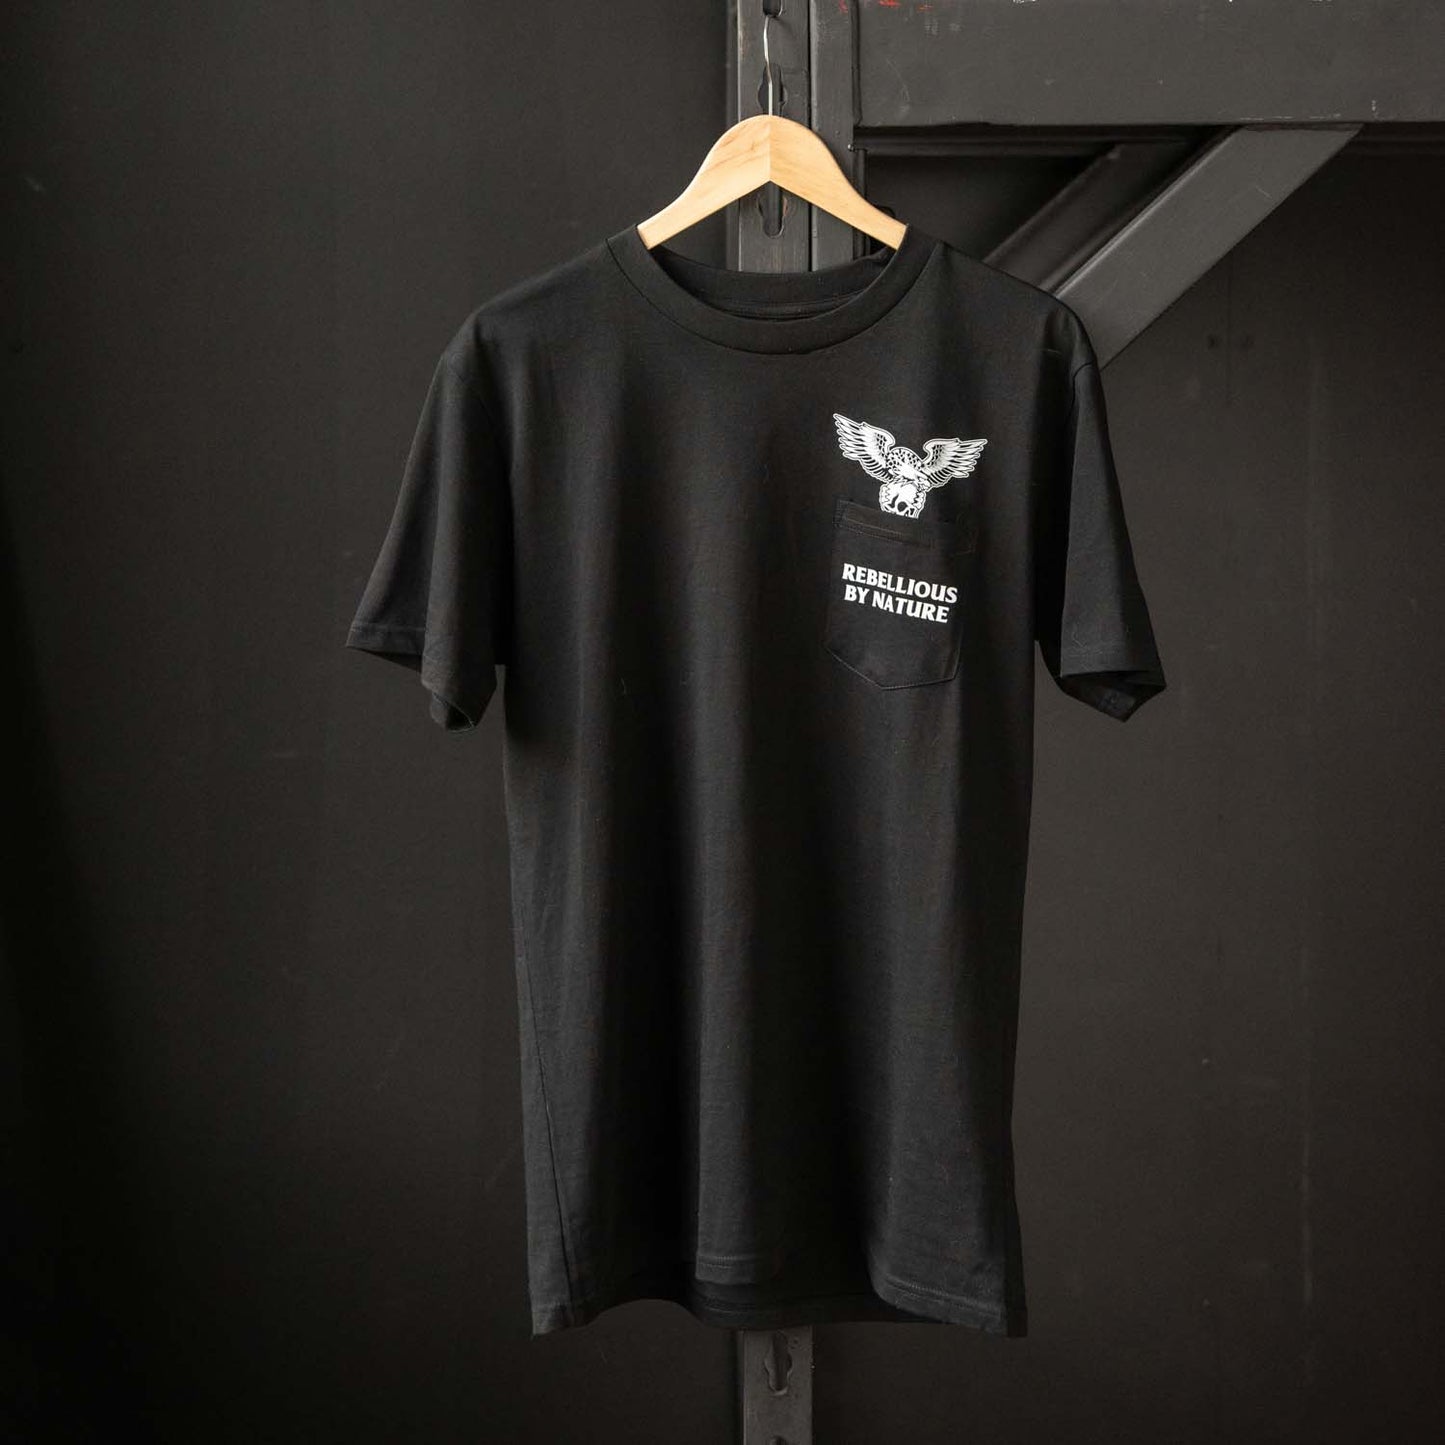 Death Wish Coffee Rebellious by Nature Pocket Tee - Front